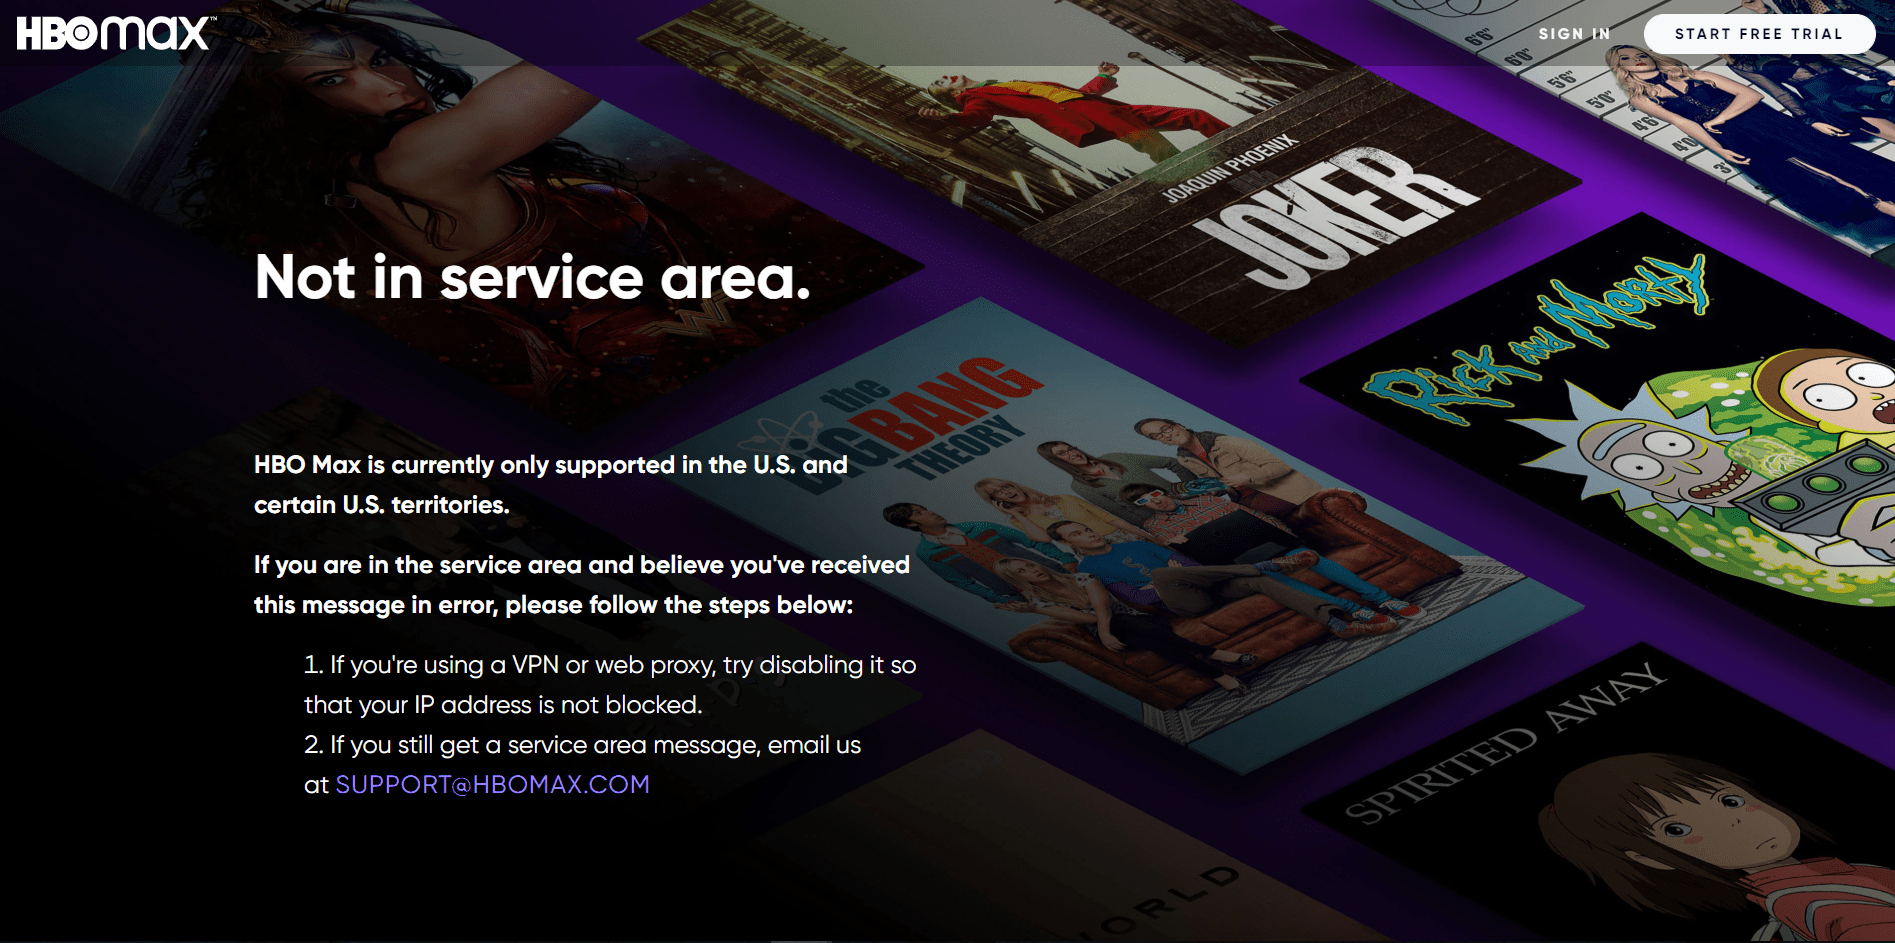 hbo max not in service area